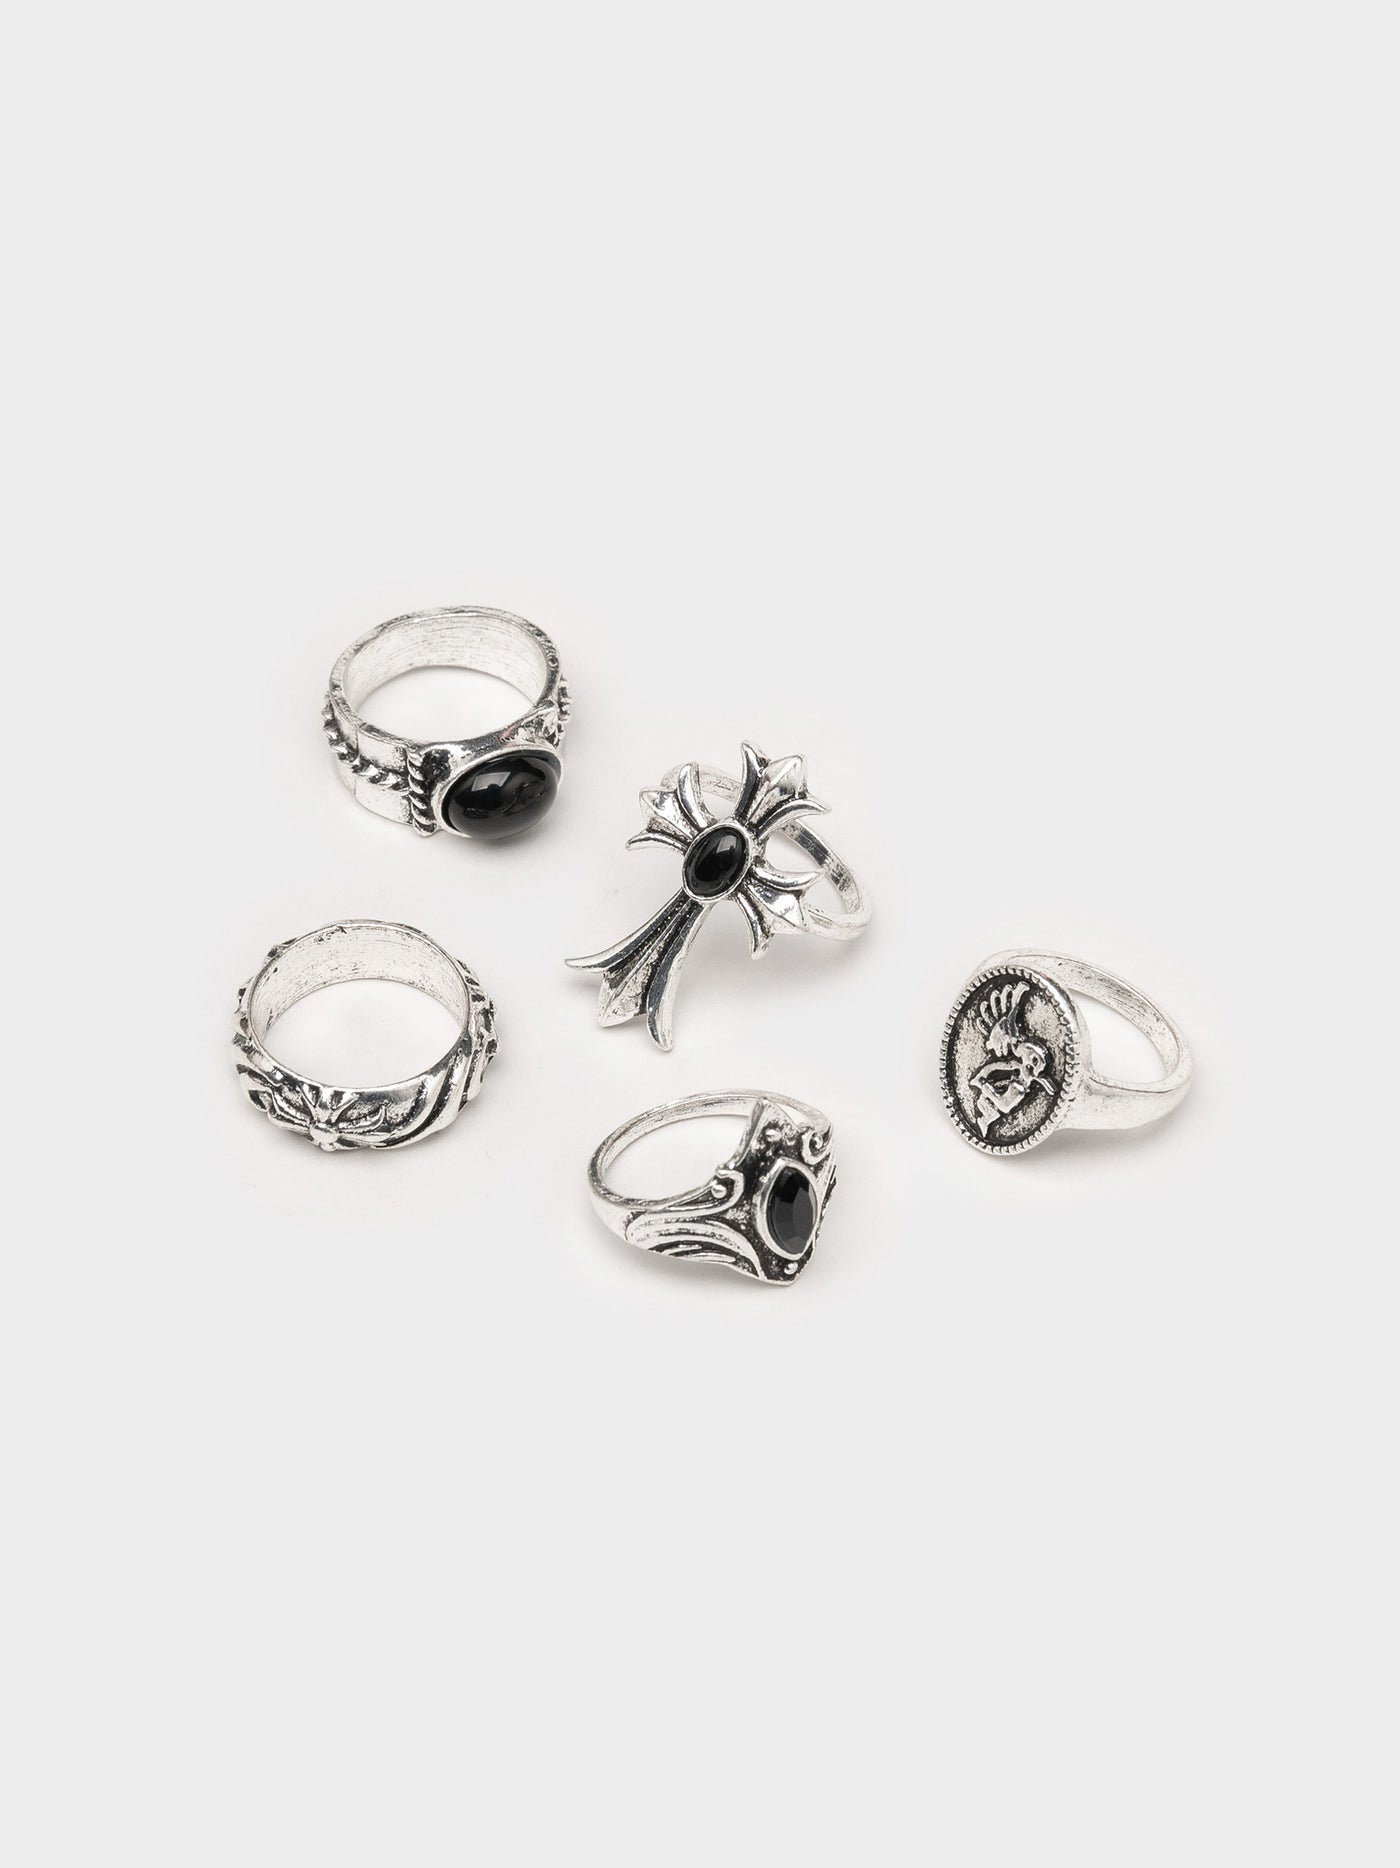 20 Pcs Adjustable Cool Goth Ring Set - Gothic Ring Set - Witch Rings |  CovenRoom